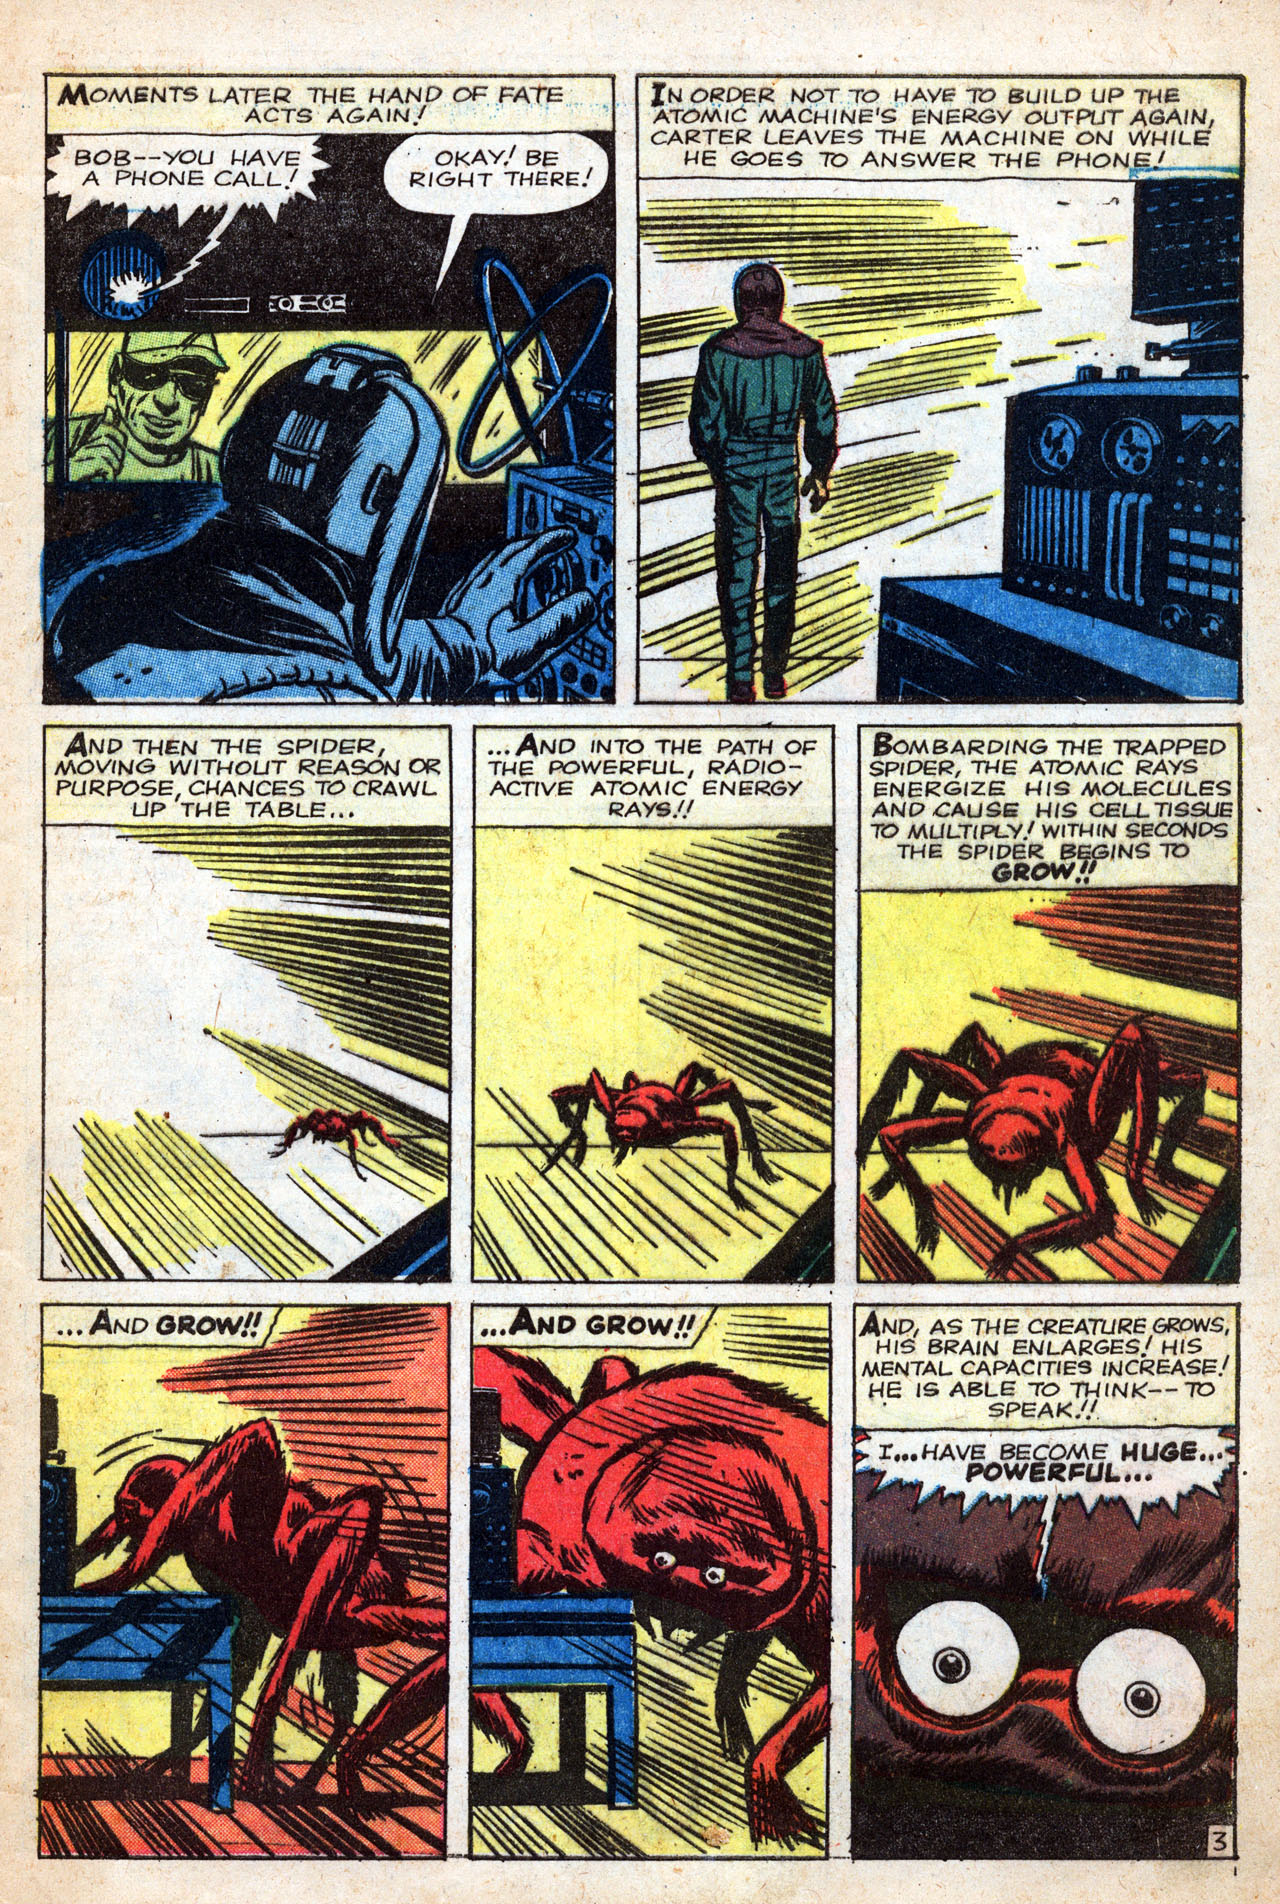 Journey Into Mystery (1952) 73 Page 4